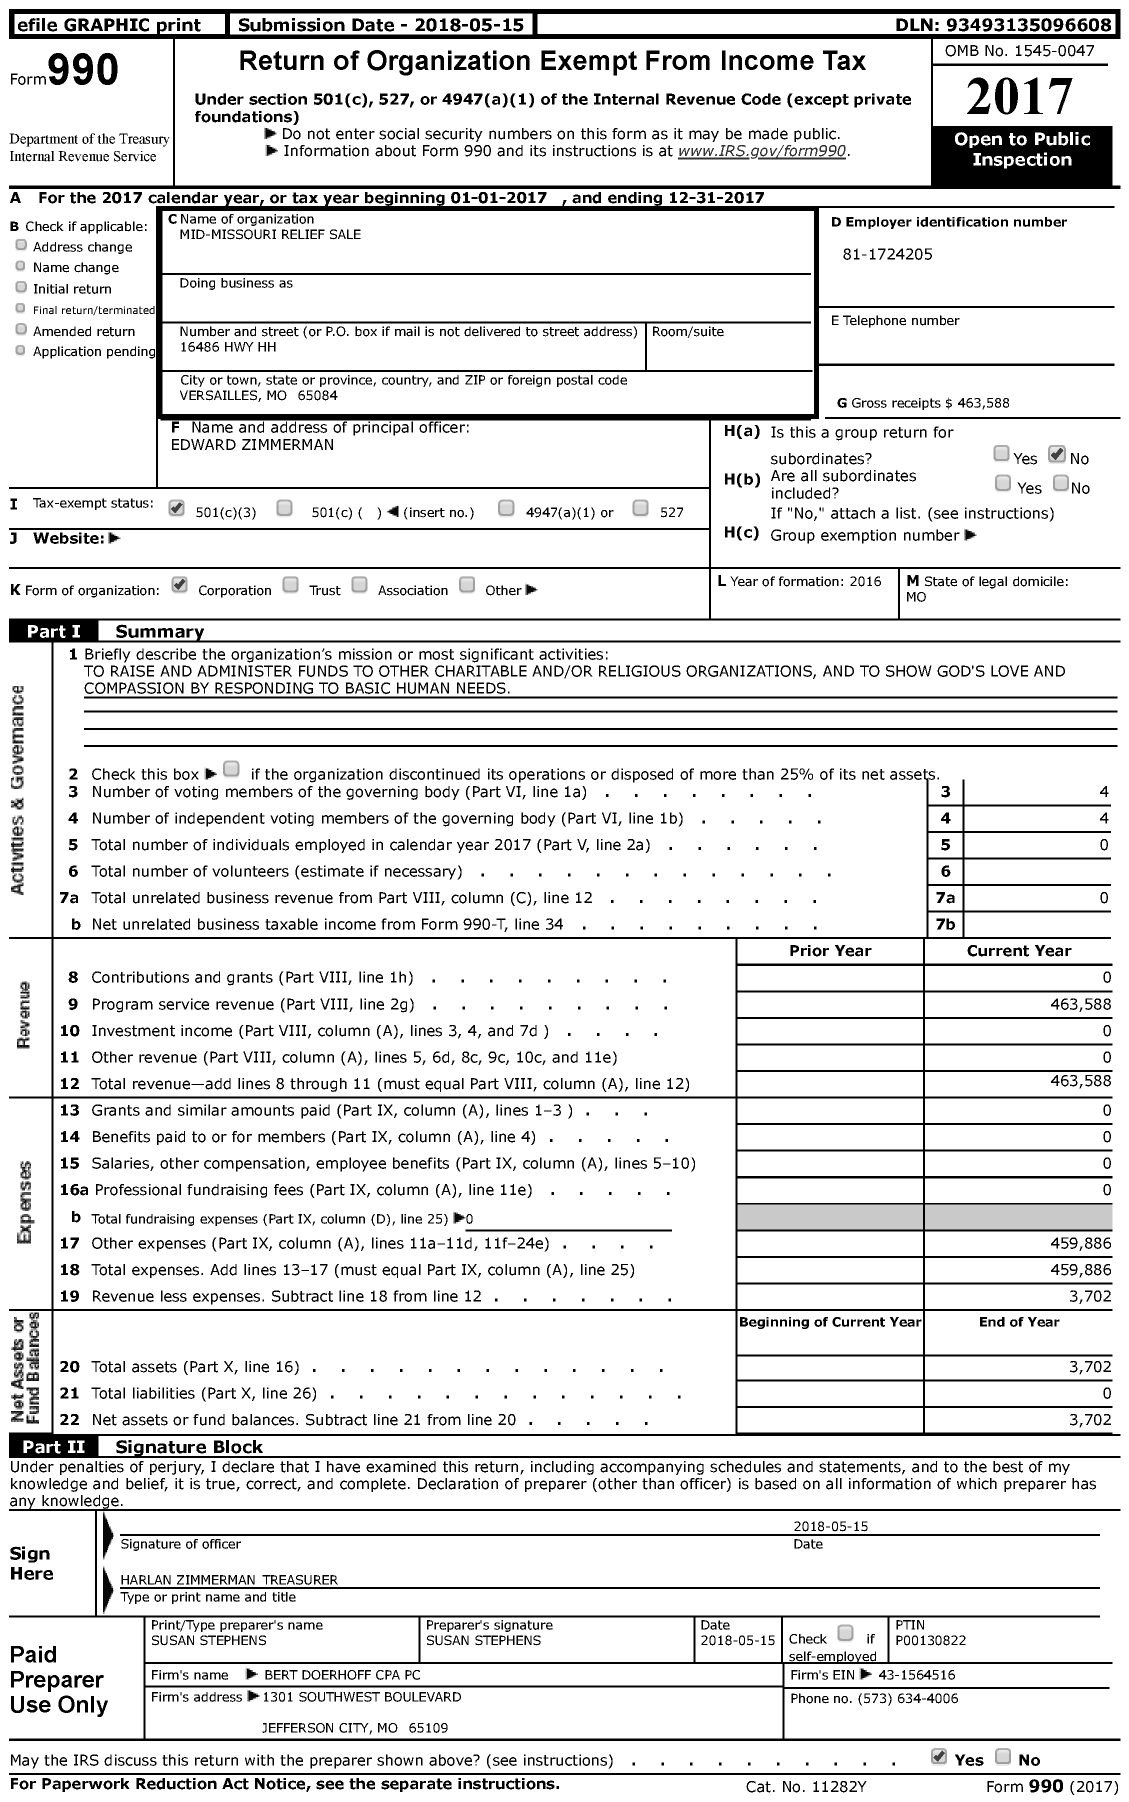 Image of first page of 2017 Form 990 for Mid-Missouri Relief Sale